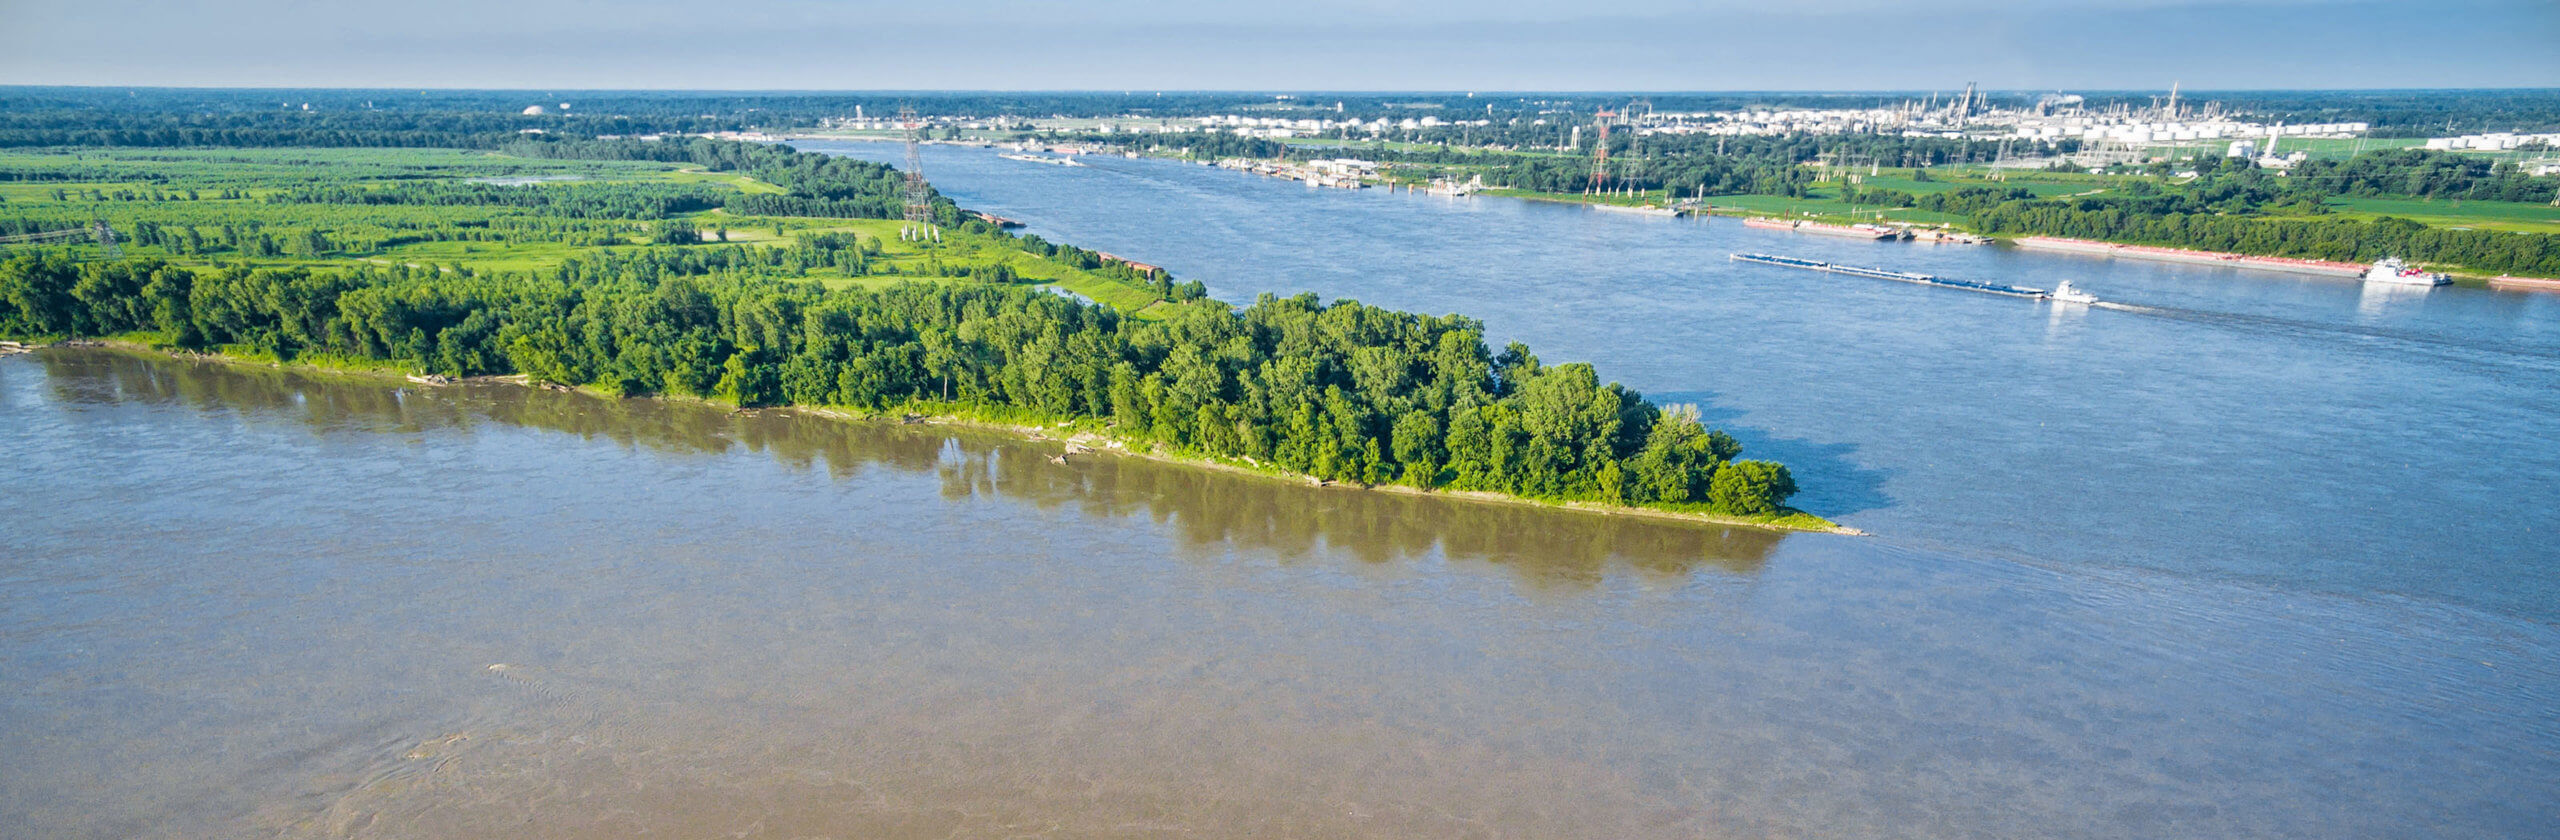 Photo of the confluence of the Mississippi River and Missouri Rivers. Two rivers merging into one with a pointy land mass in between.